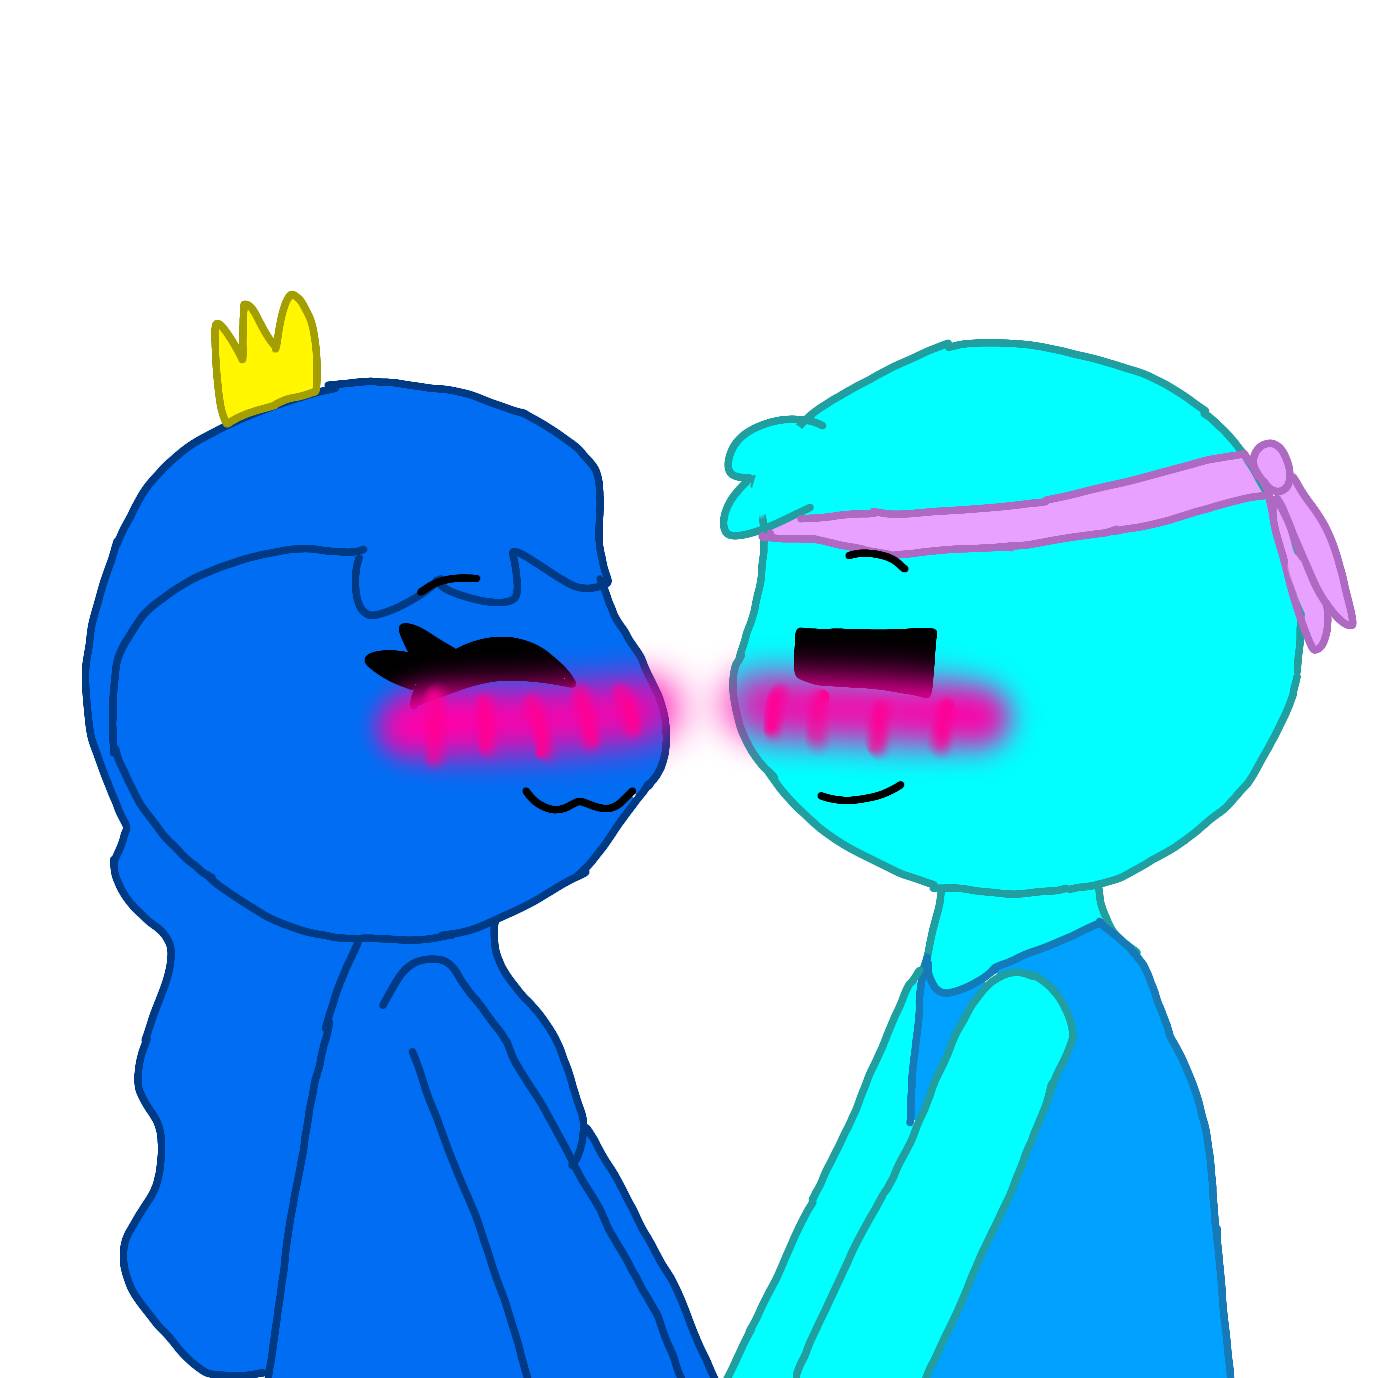 Rainbow friends Green and Blue by EvushnaCat on DeviantArt